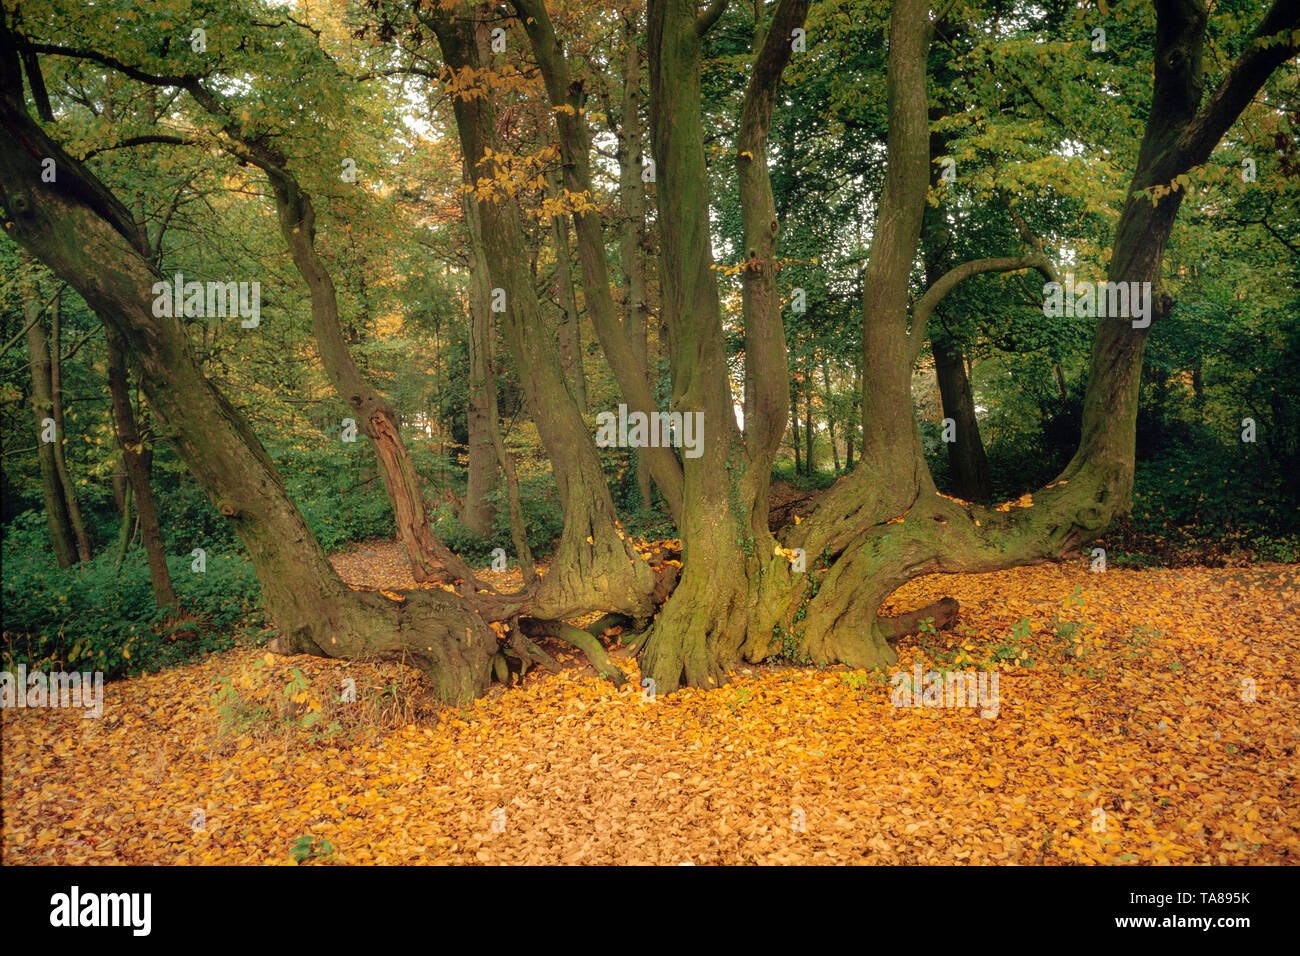 Spreading mature tree trunk & branches, autumn forest floor covered in fallen leaves Stock Photo